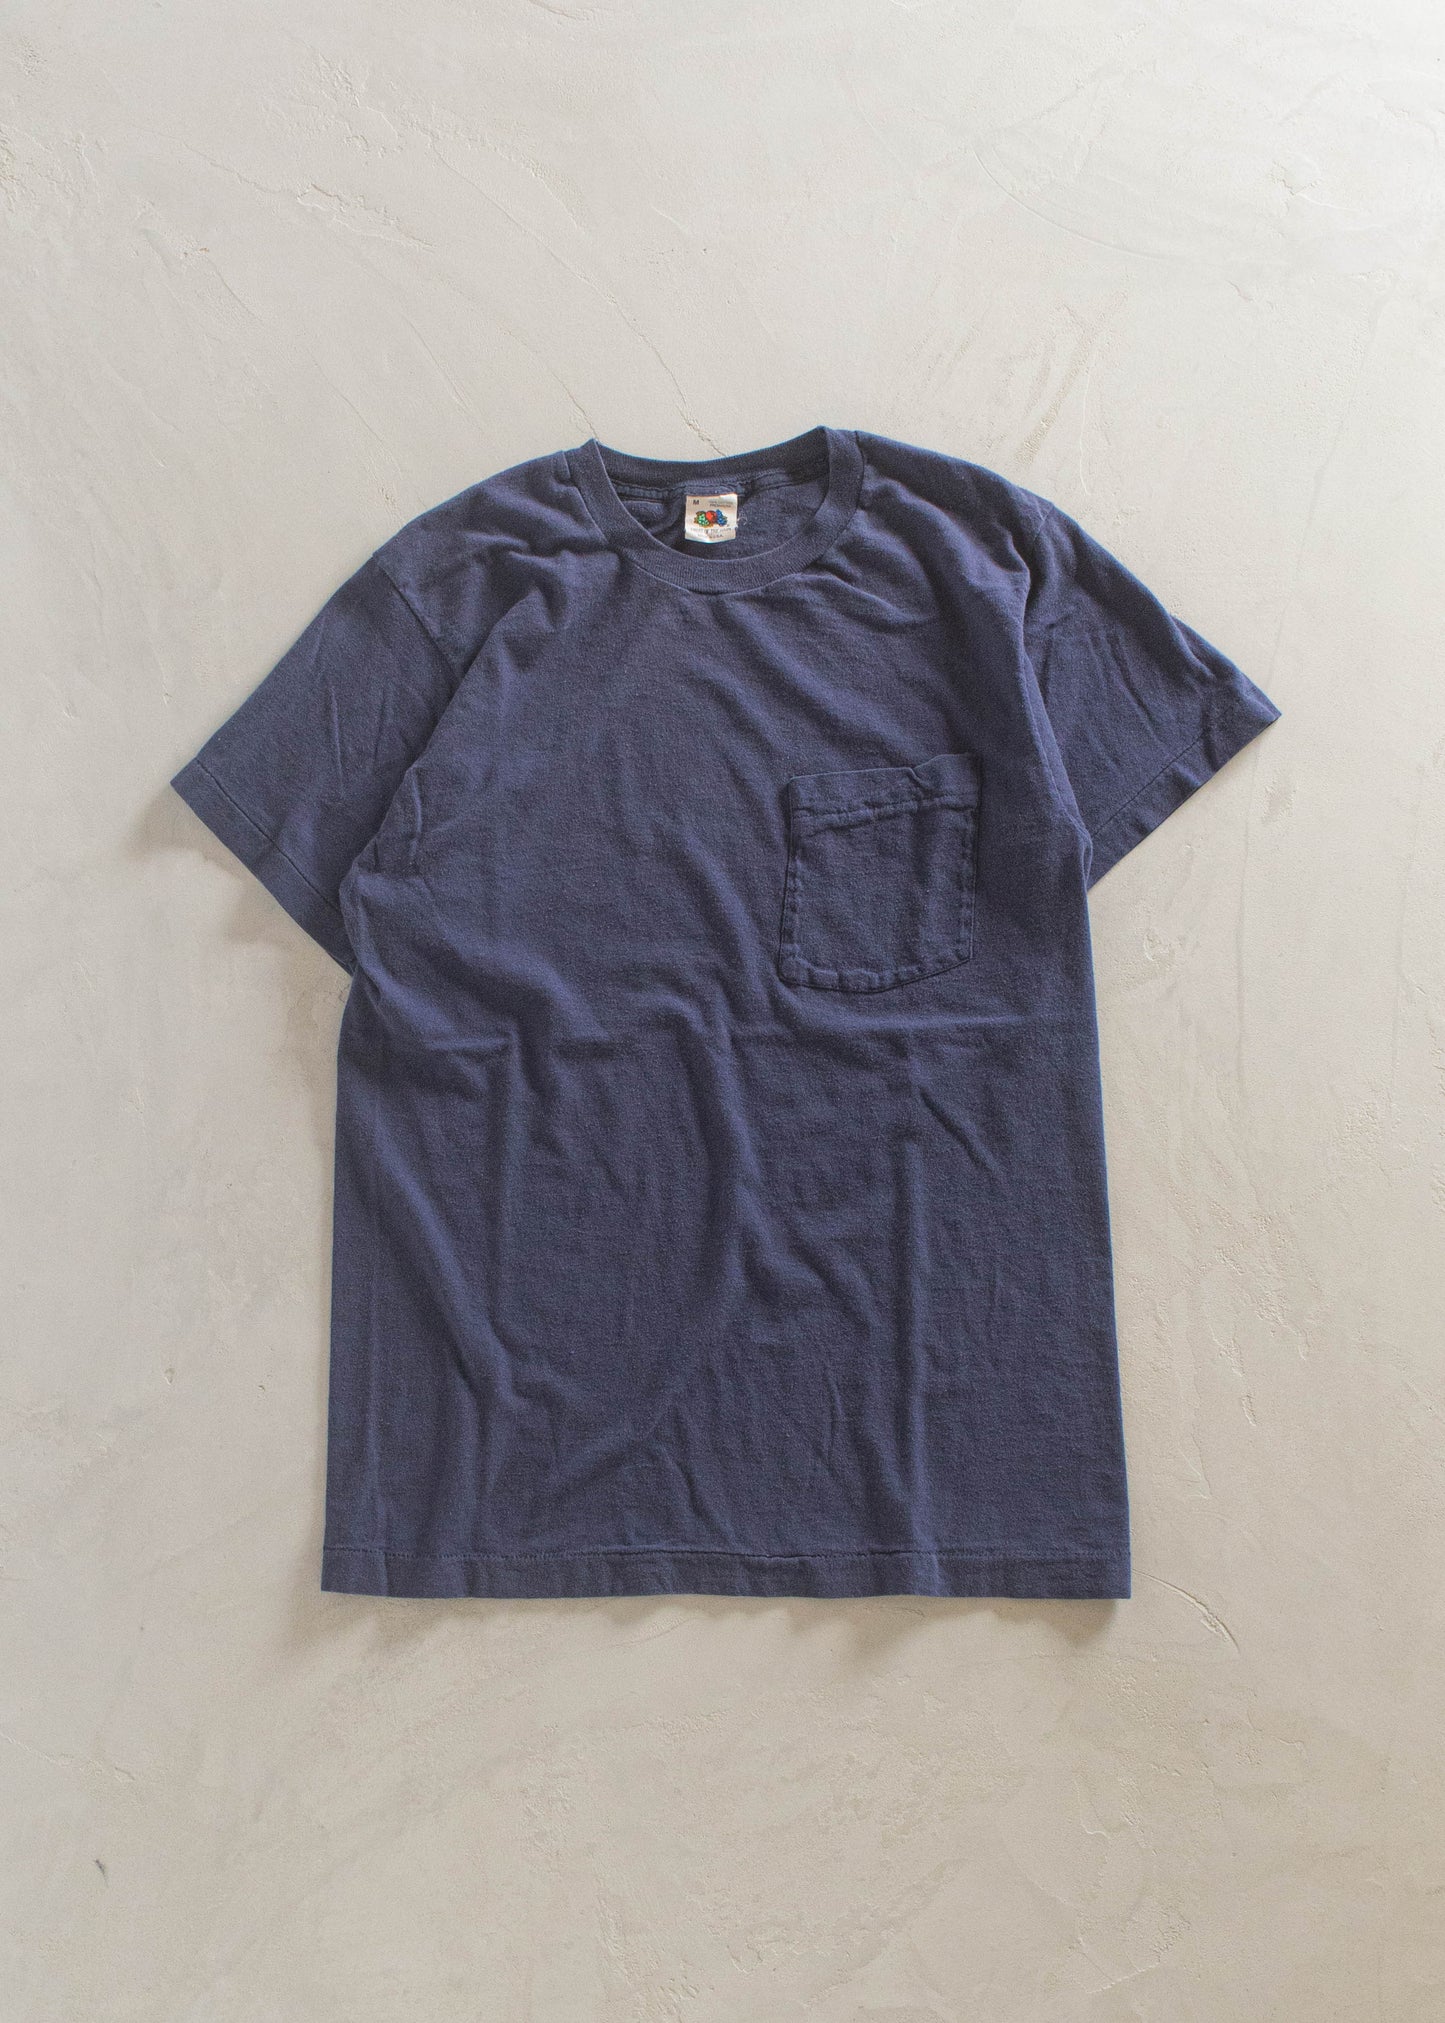 1980s Fruit of the Loom Selvedge Pocket T-Shirt Size S/M